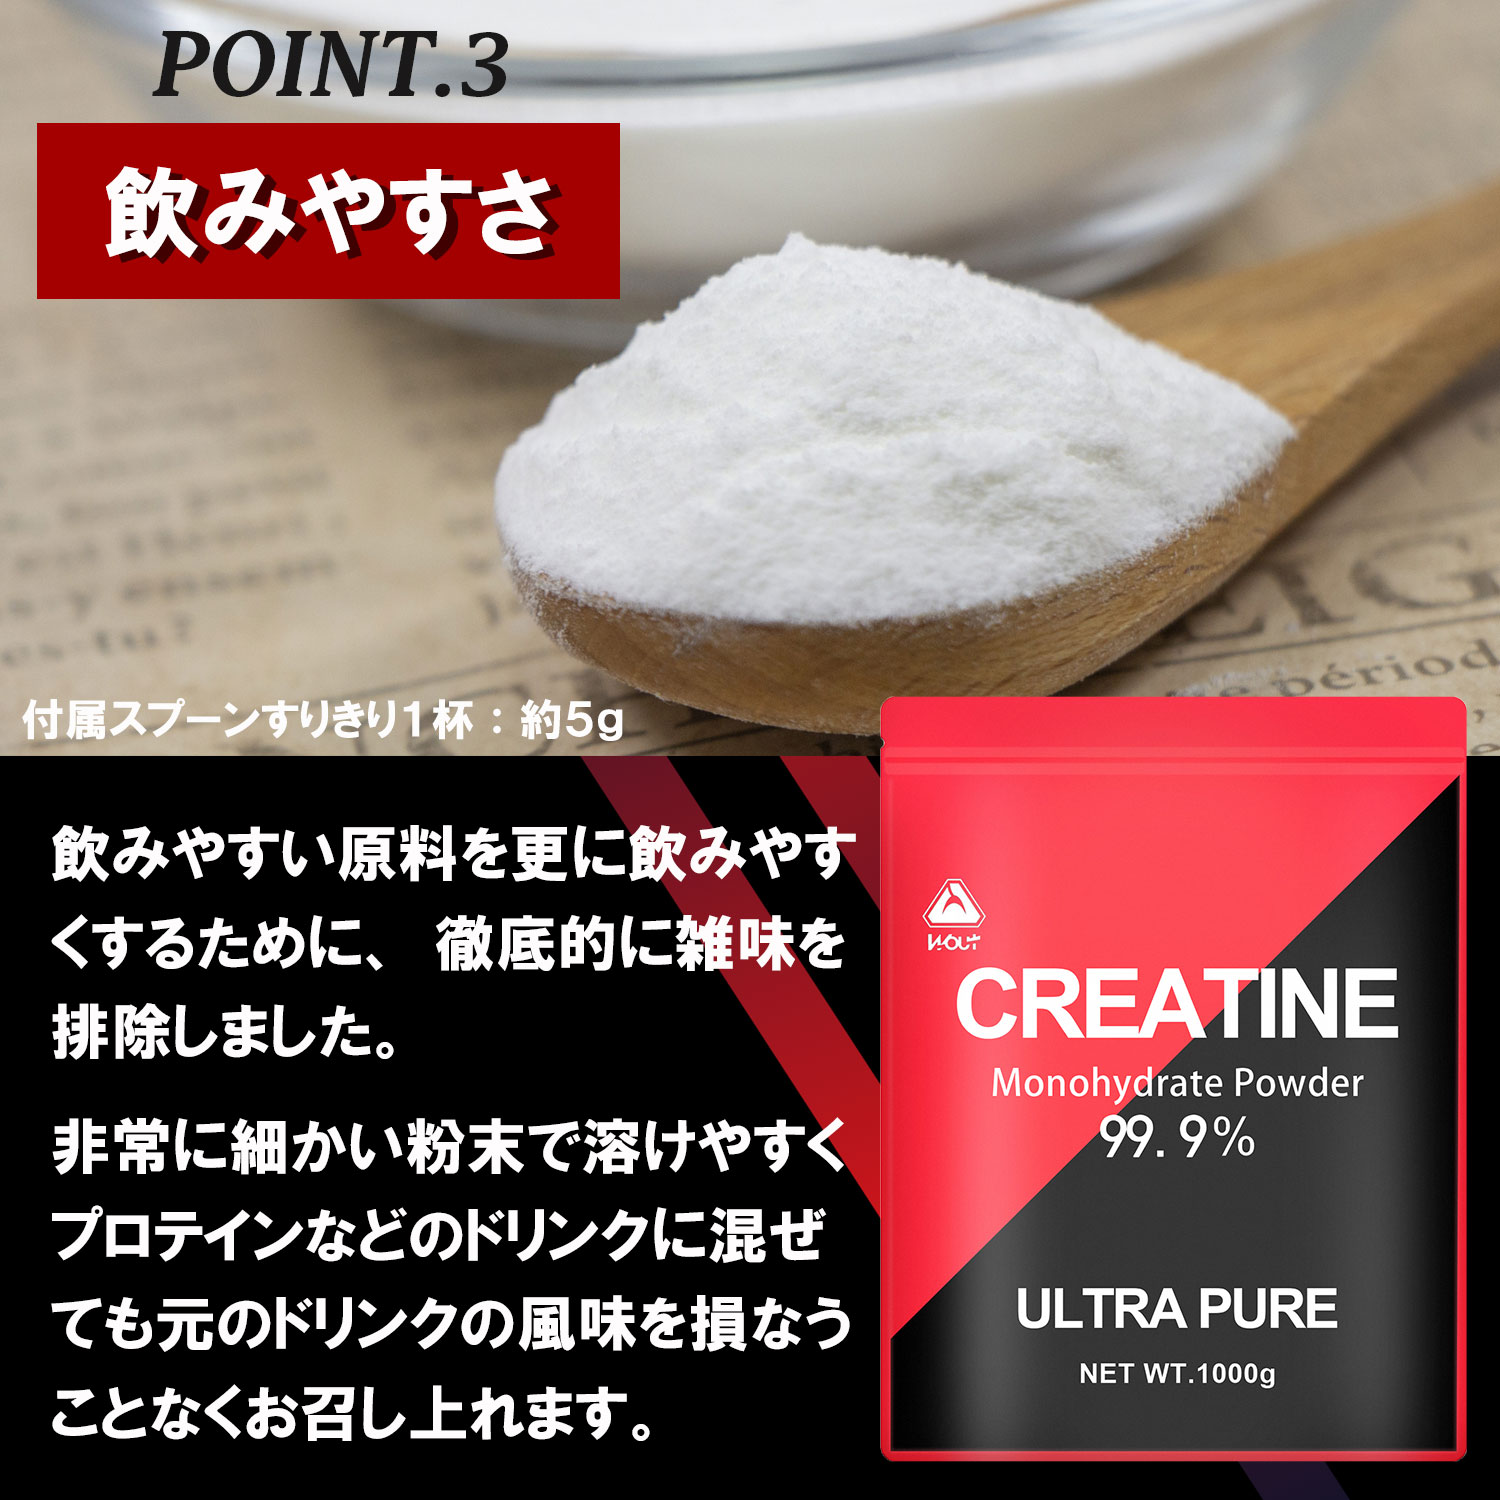  creatine mono hyde rate 1000000mg wow to1000g 200 meal minute Ultra pure powder 99.9% no addition 1kg